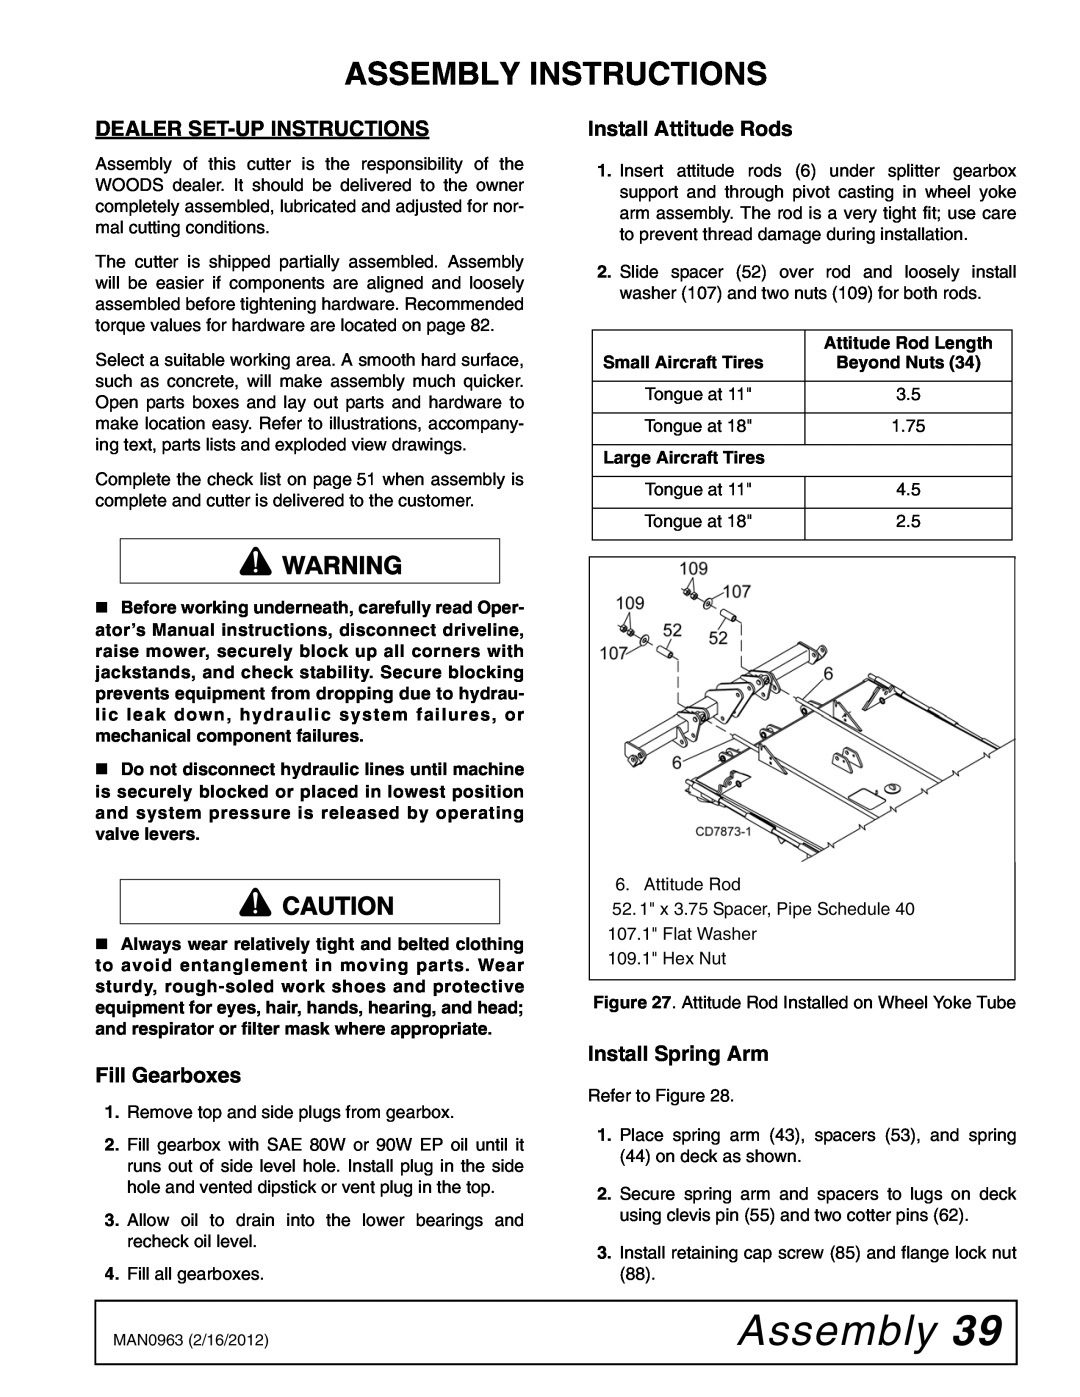 Woods Equipment BW126XHD manual Assembly Instructions, Dealer Set-Upinstructions, Fill Gearboxes, Install Attitude Rods 